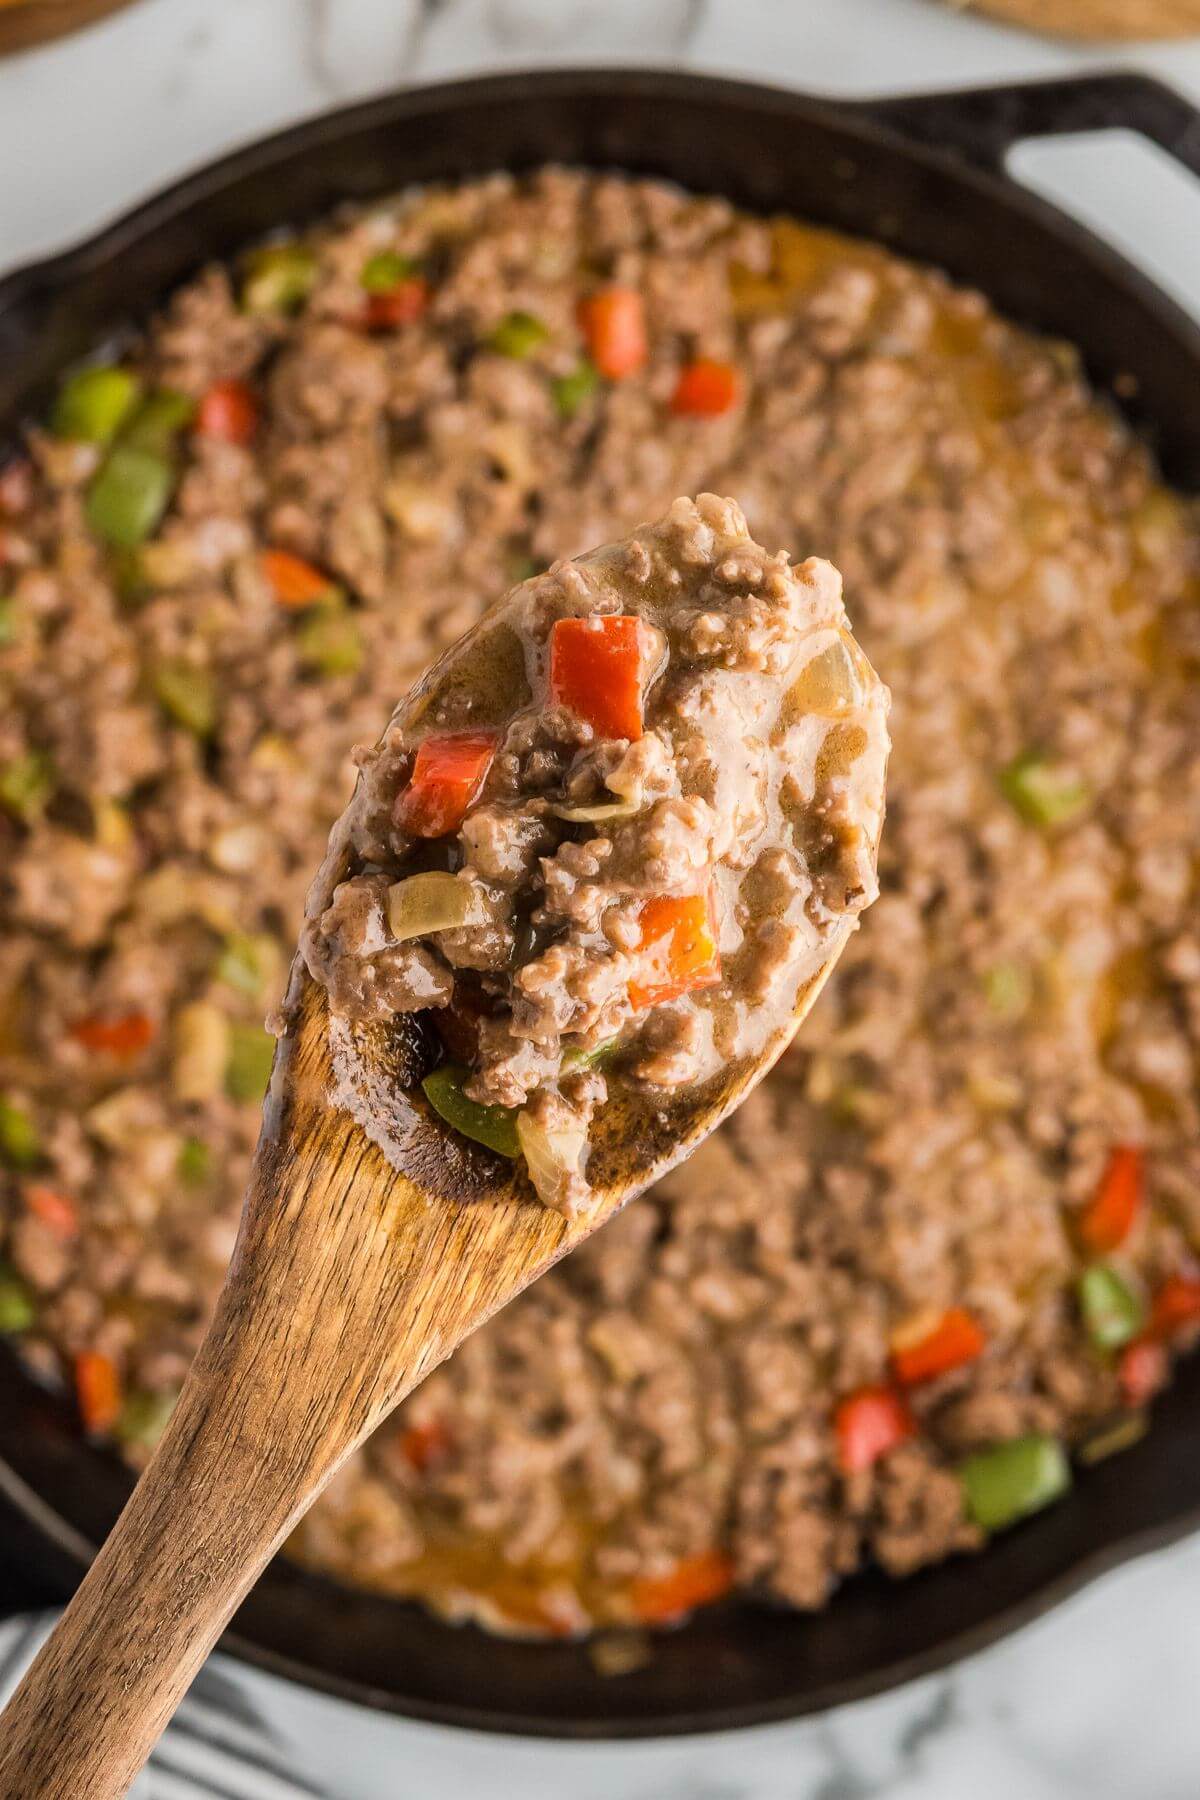 A wooden spoon holds up the saucy meat and peppers above the skillet.